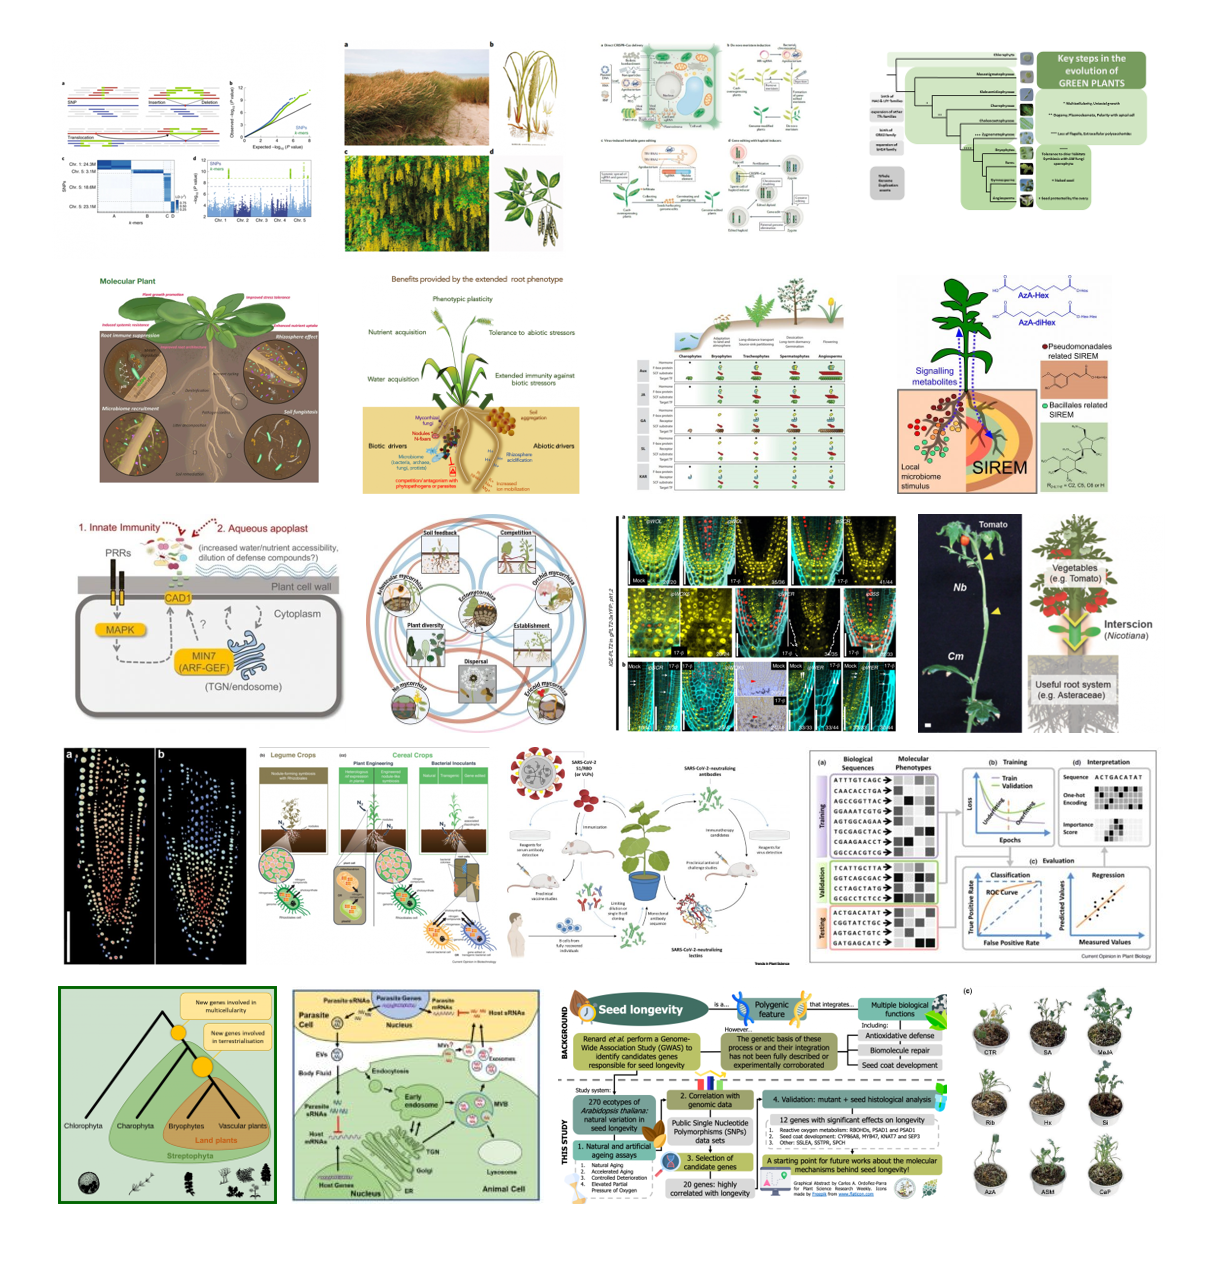 life science research topics plants